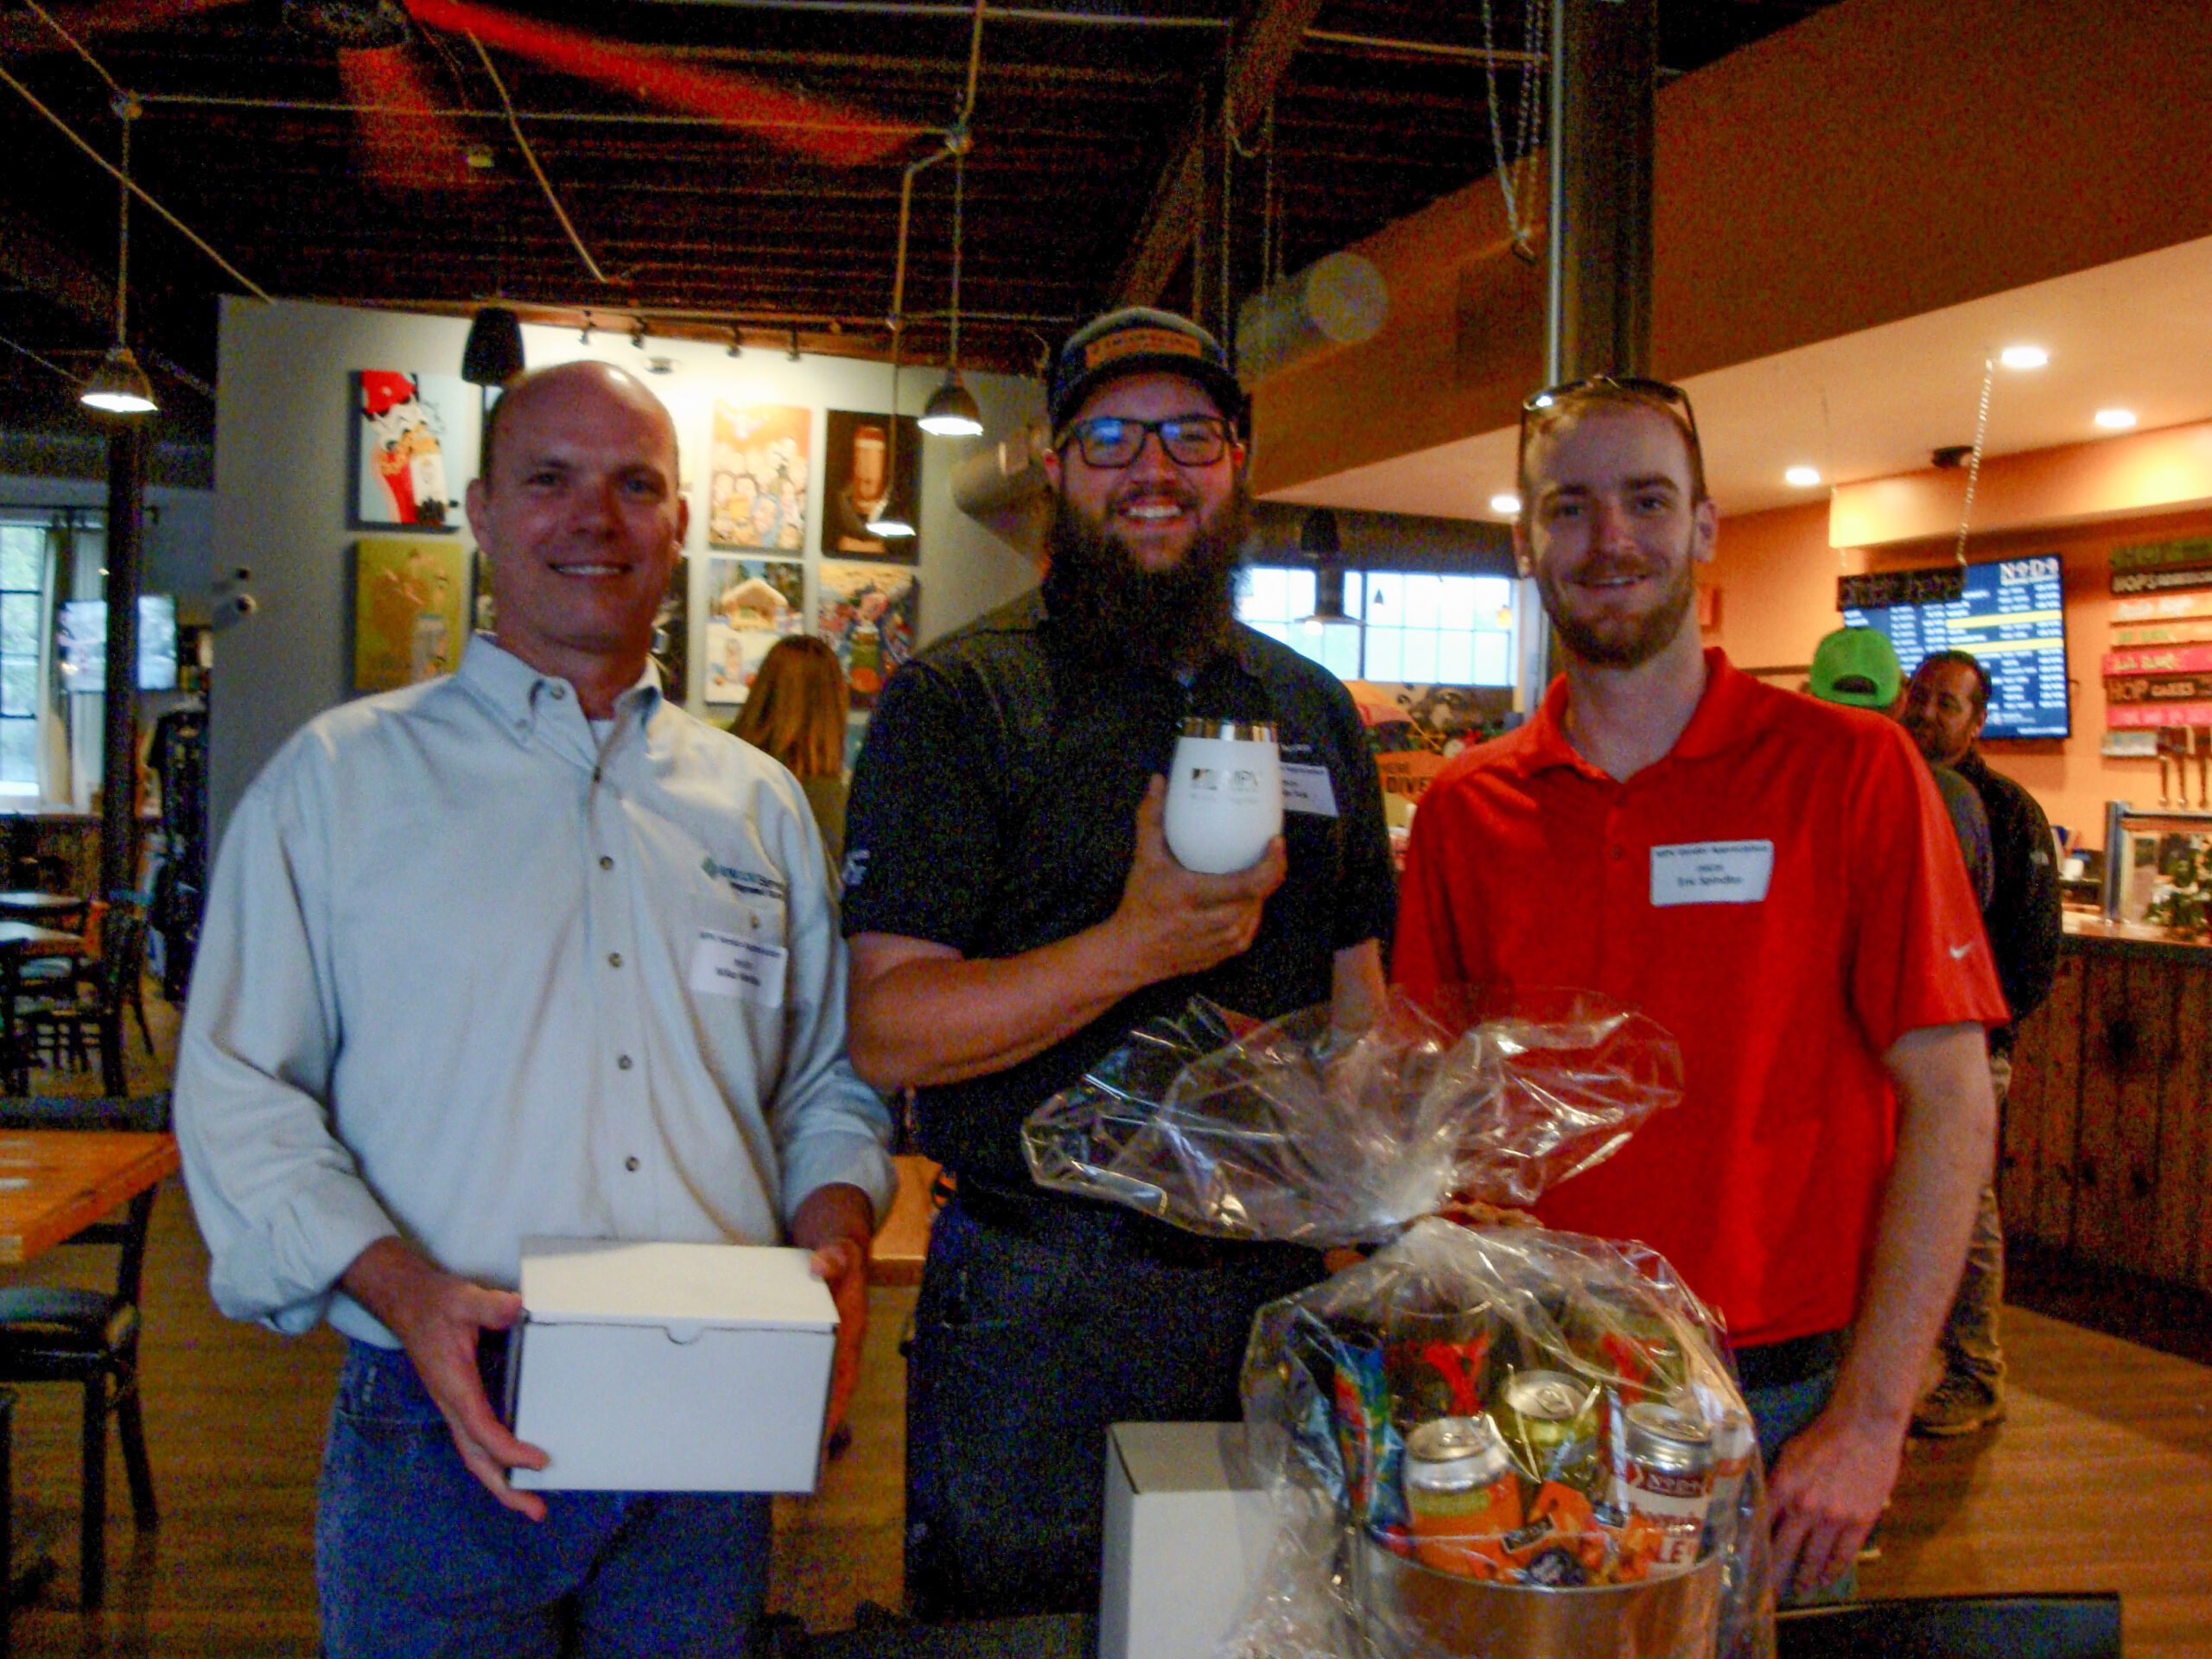 MPV event at NoDa brewery three adult men smiling in front of gift basket